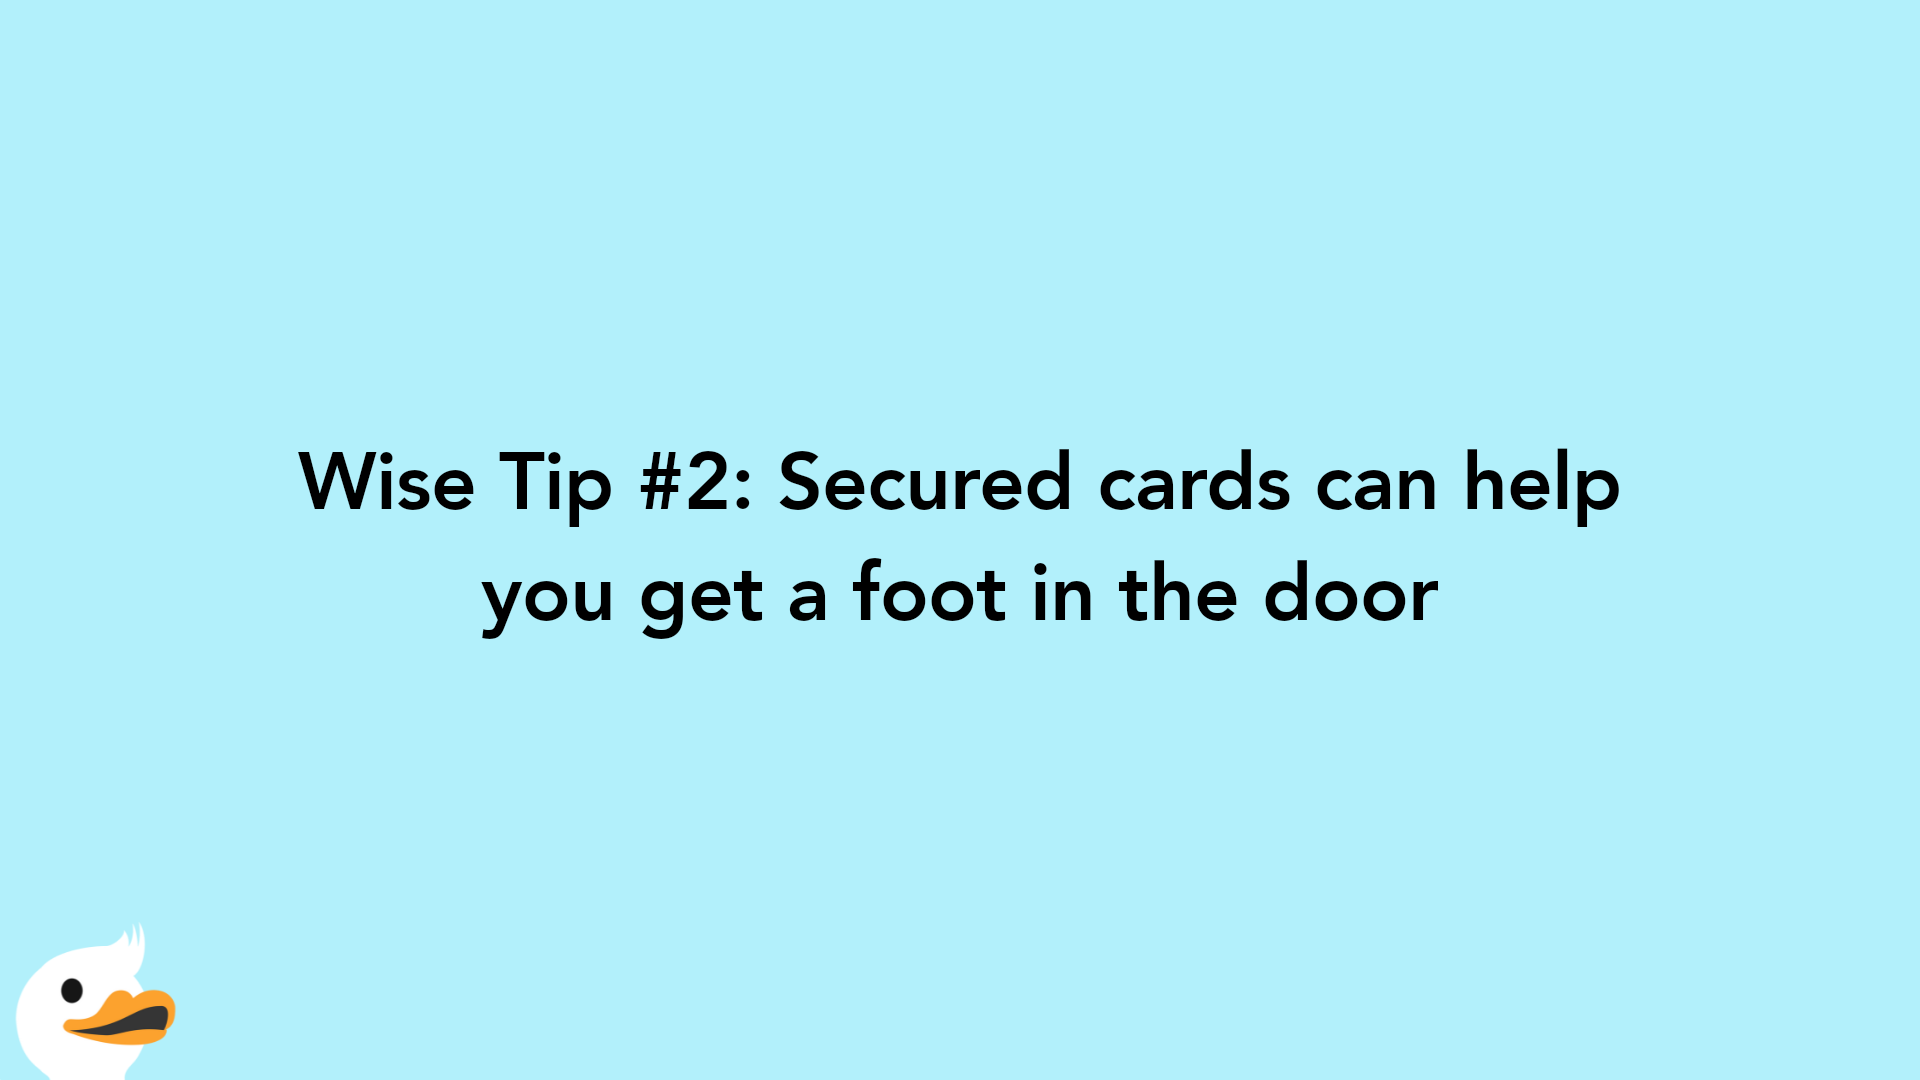 Wise Tip #2: Secured cards can help you get a foot in the door